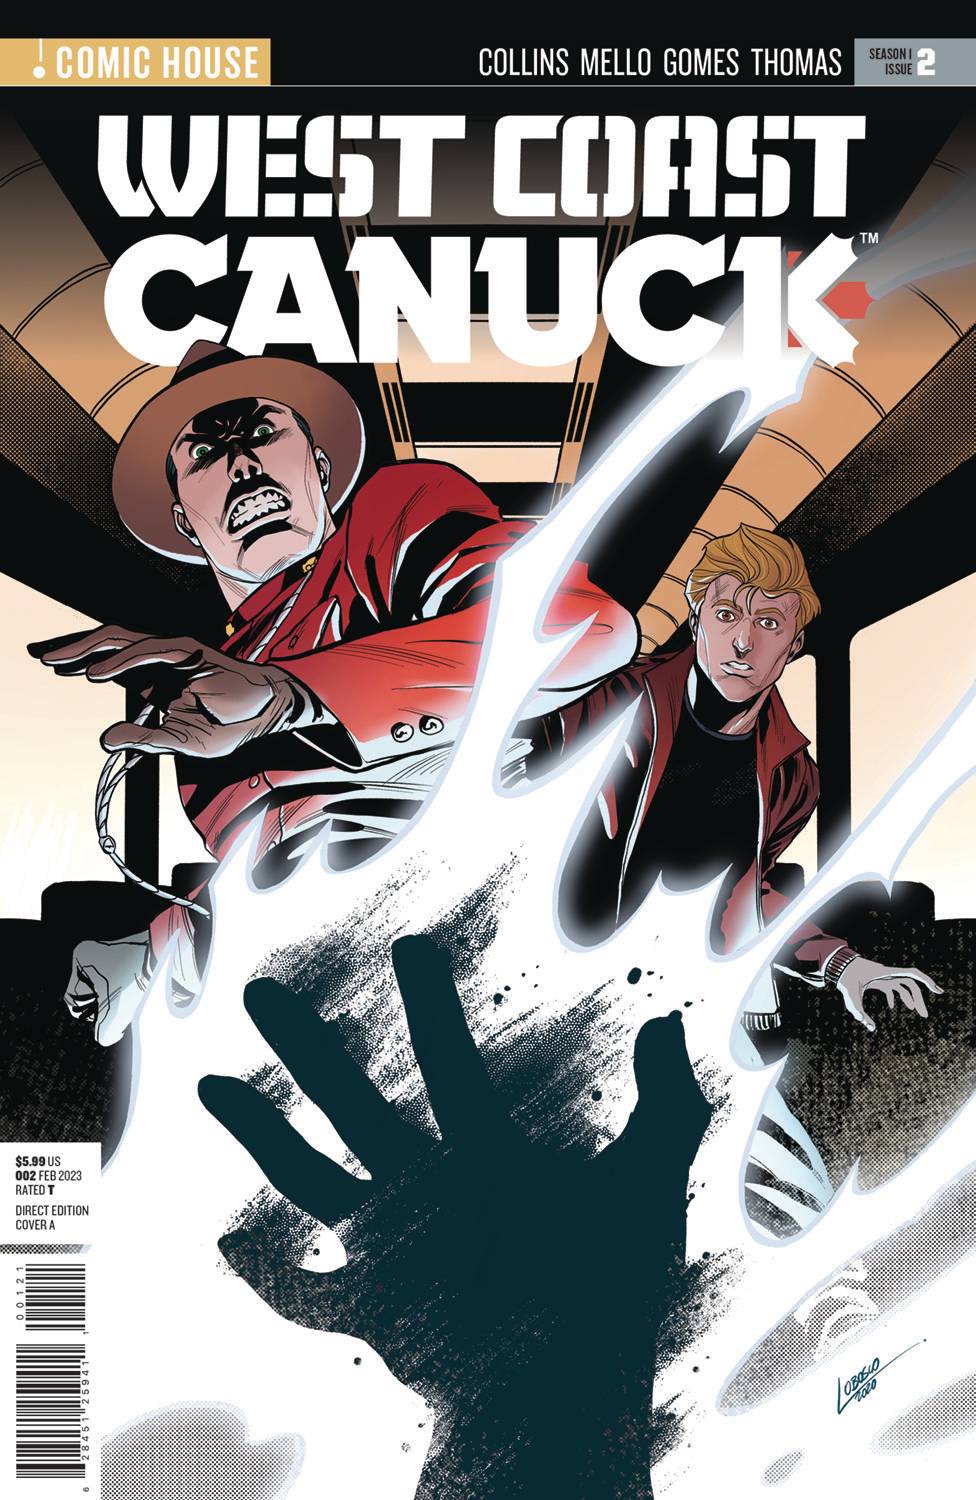 WEST COAST CANUCK #2 , IN STORES: 03/01/2023 - The Comic Construct